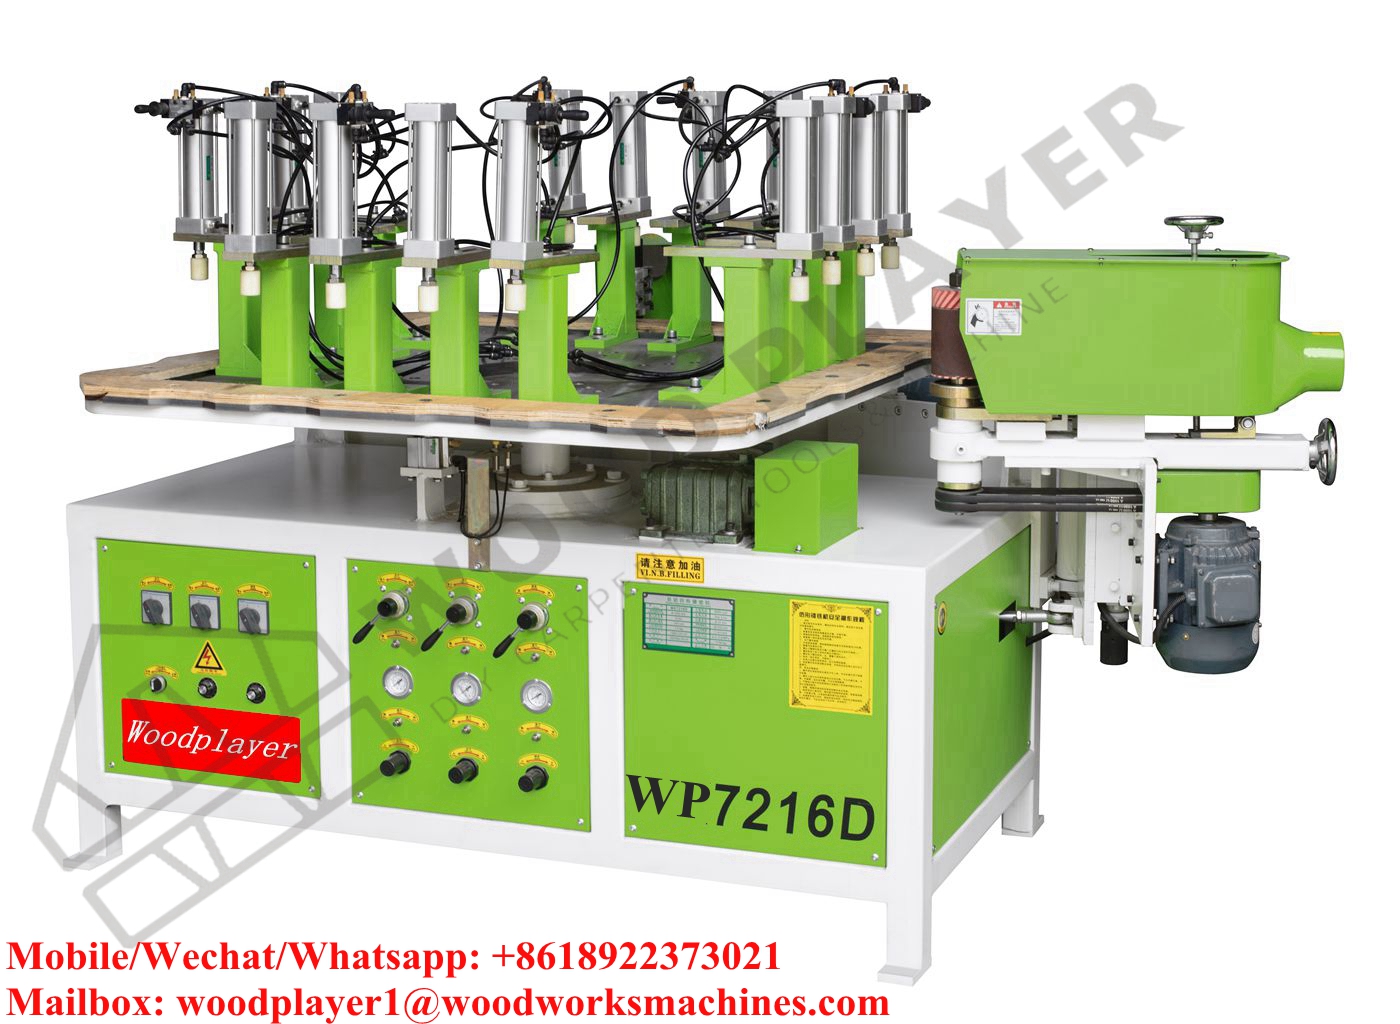 WP7216D Auto Copy Shaper (Sanding) Multi-Functional Automatic Profiling Gong-Milling Machine For Woodworking Machinery